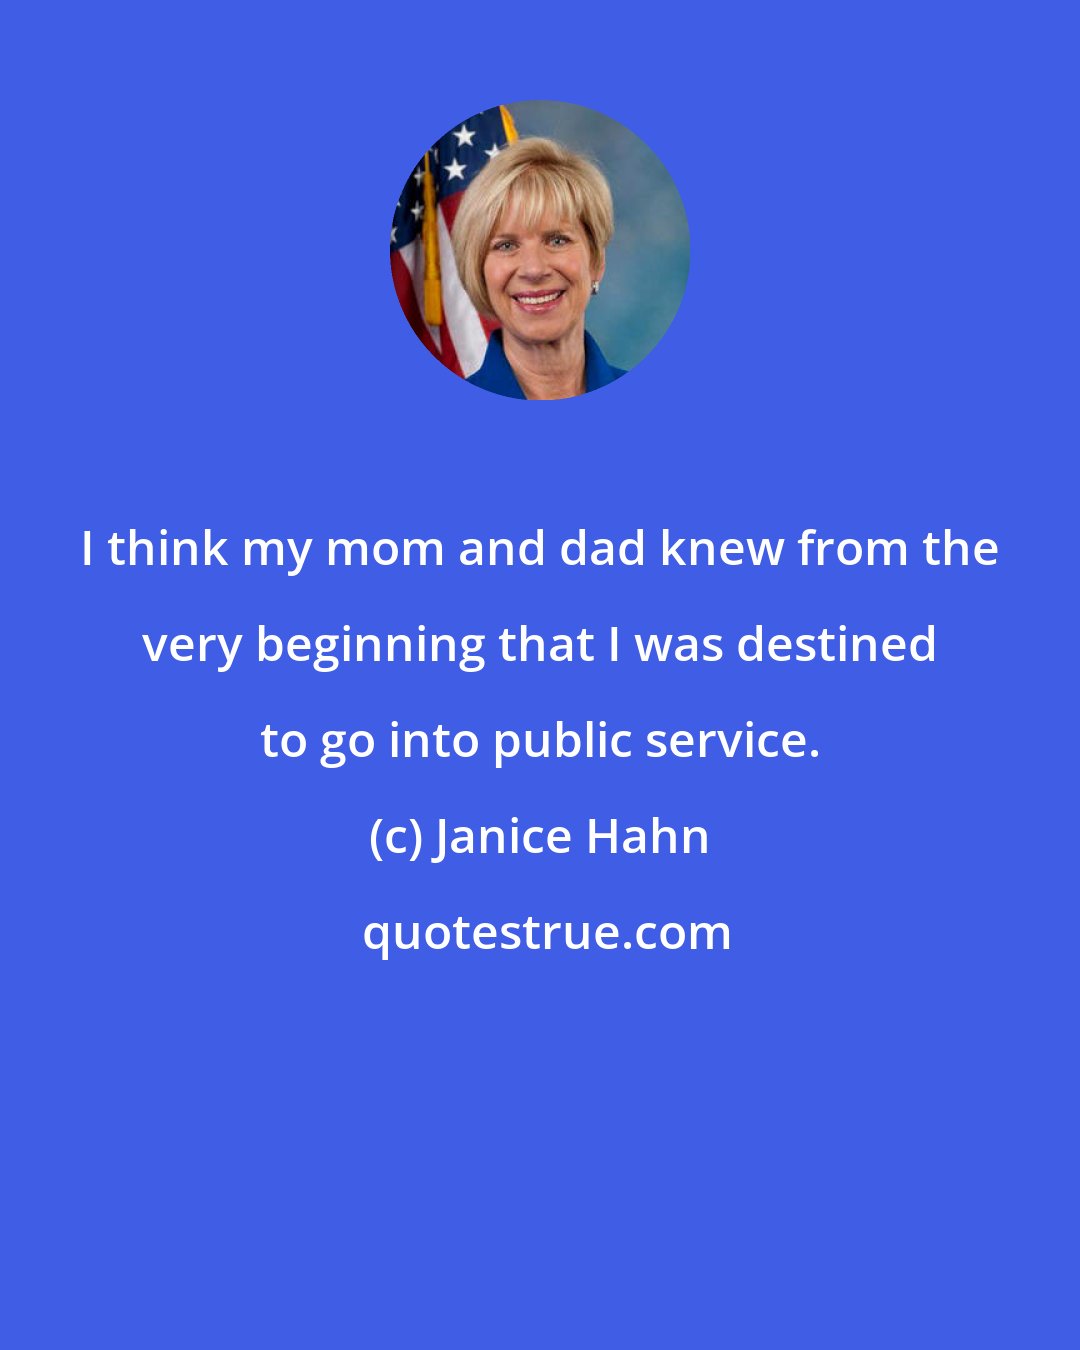 Janice Hahn: I think my mom and dad knew from the very beginning that I was destined to go into public service.